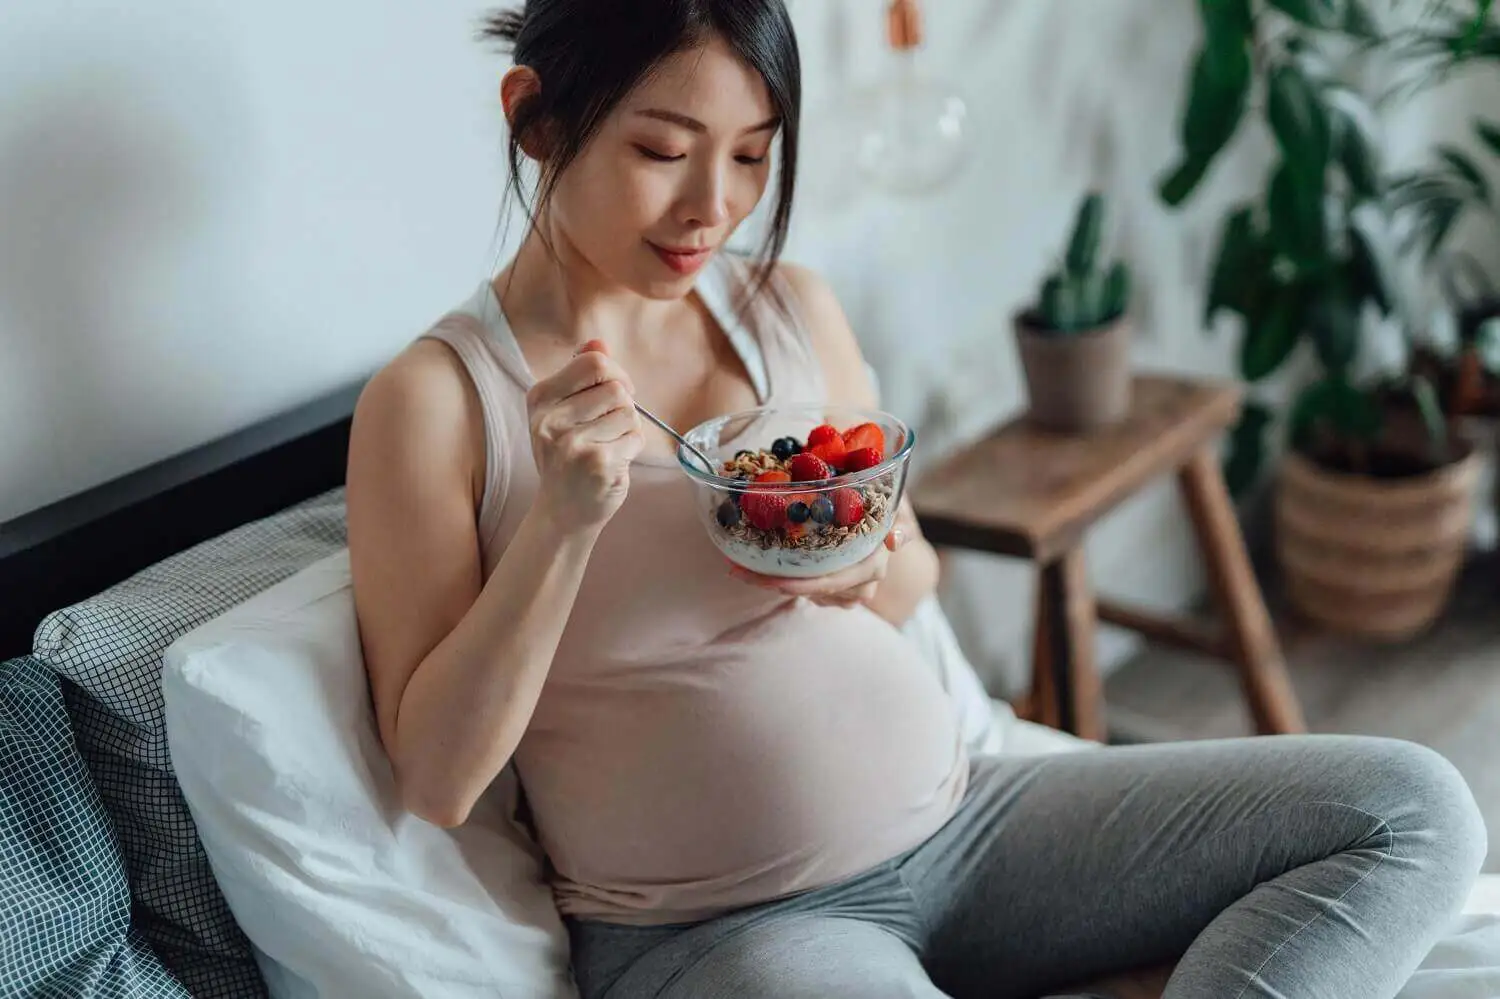 Woman eating during pregnancy